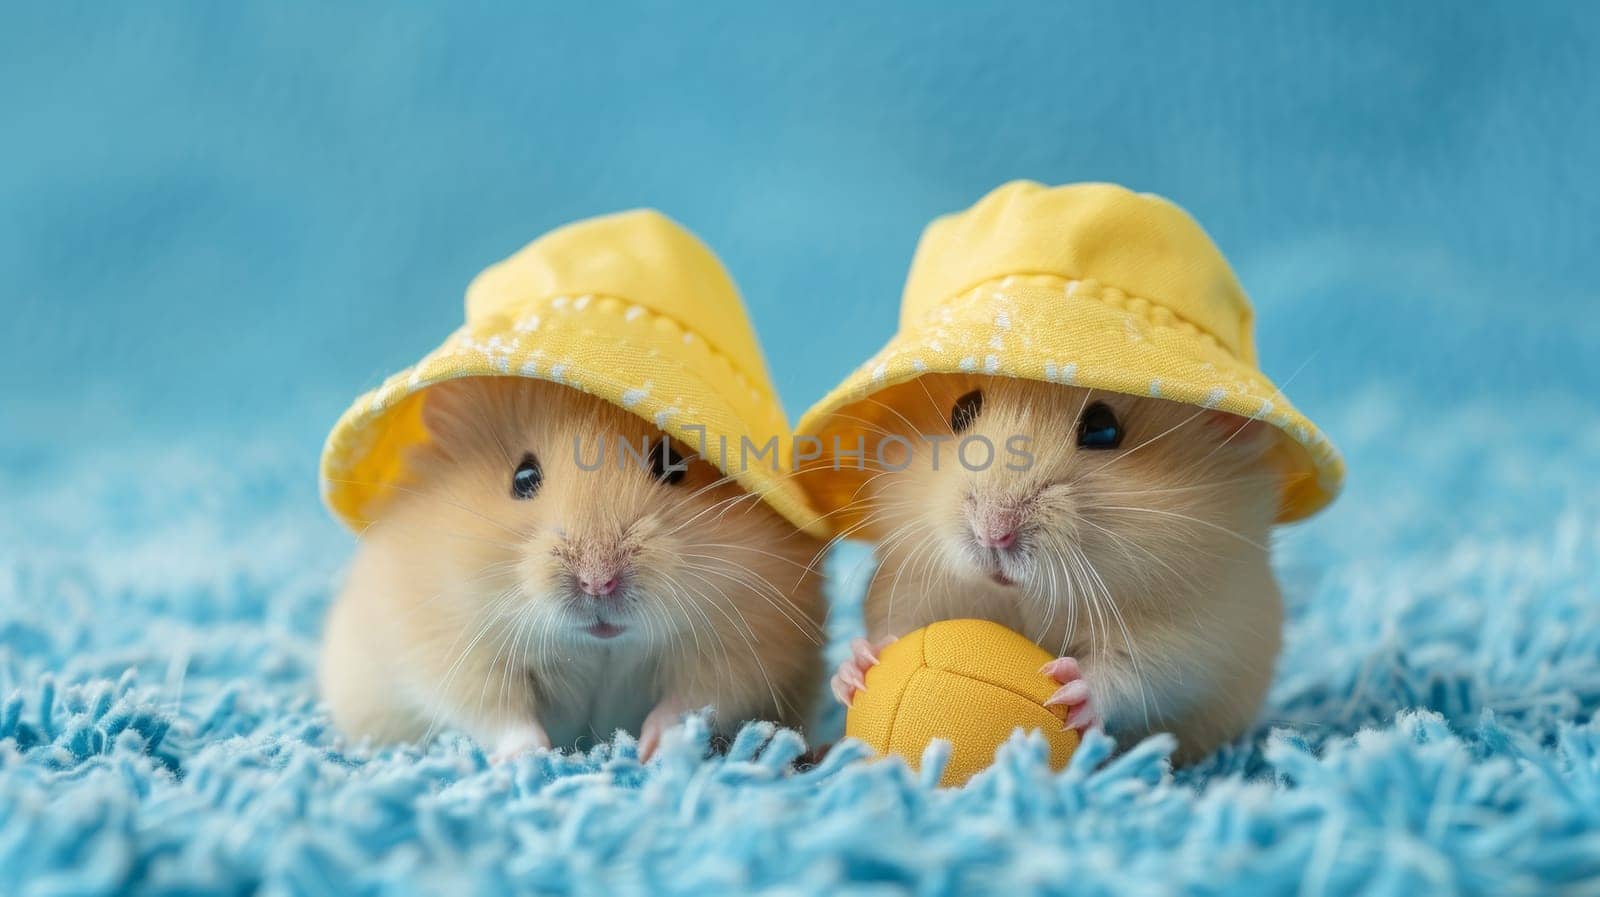 Two small hamsters wearing yellow hats and holding a ball, AI by starush